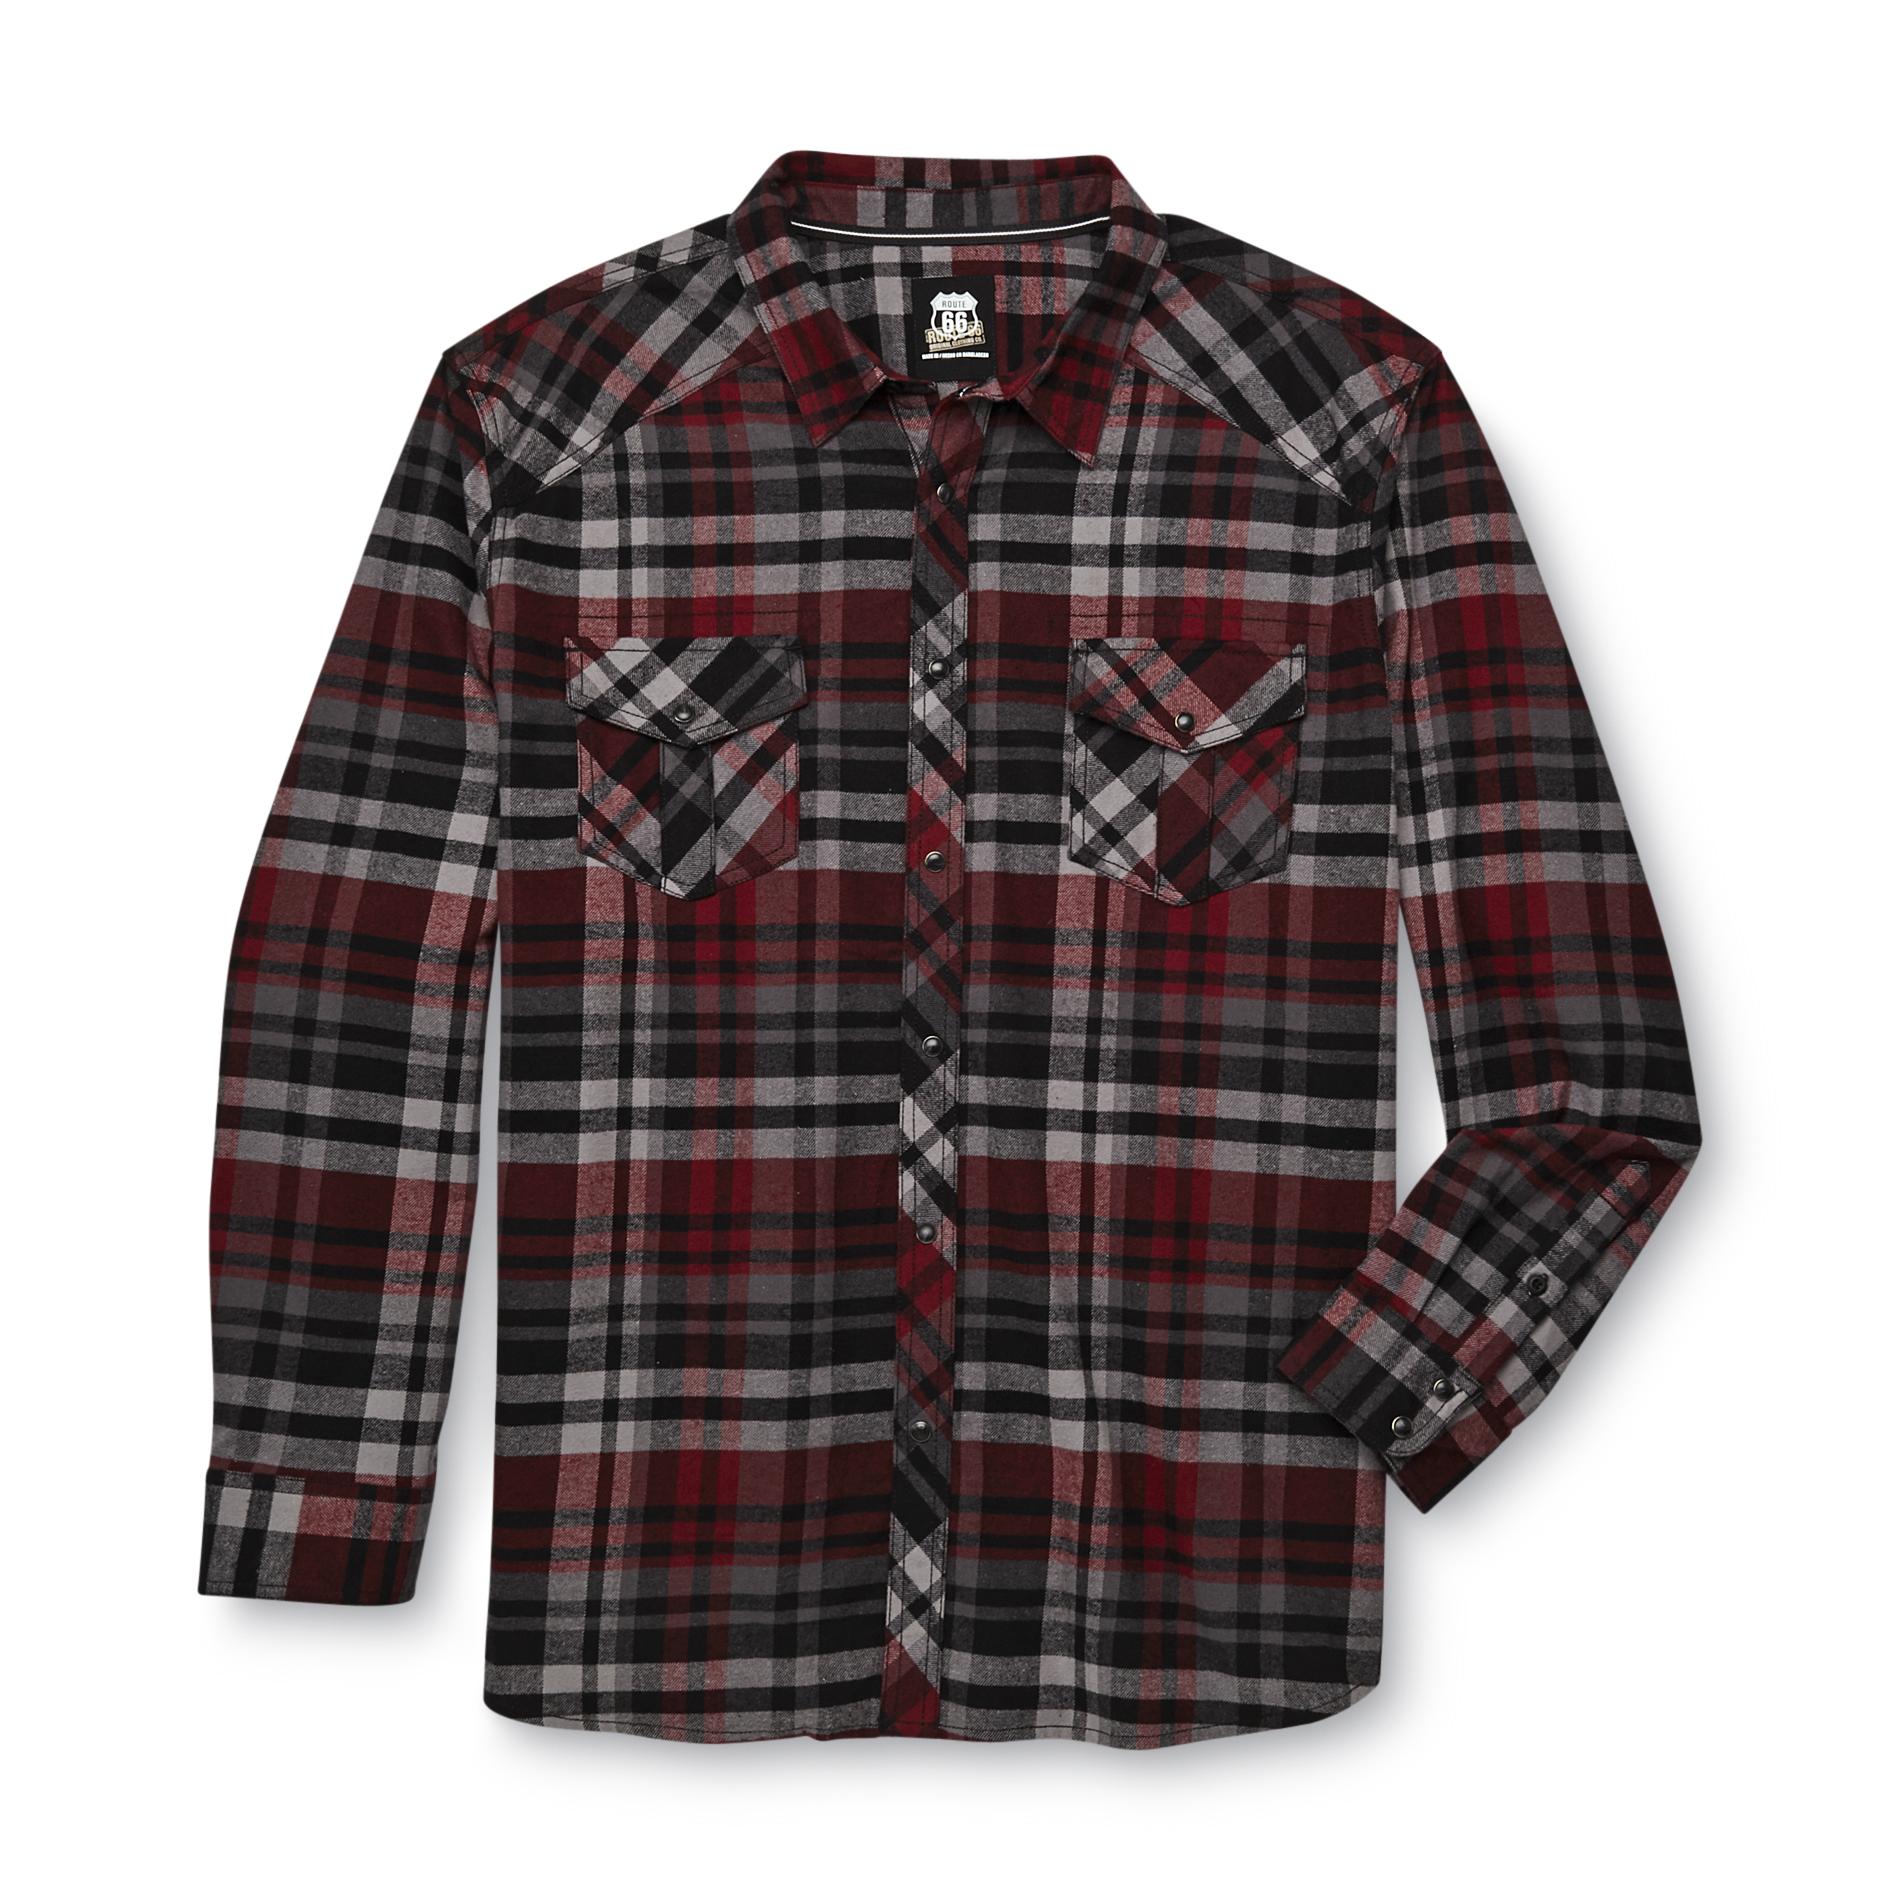 Route 66 Men's Big & Tall Snap-Front Flannel Shirt - Plaid